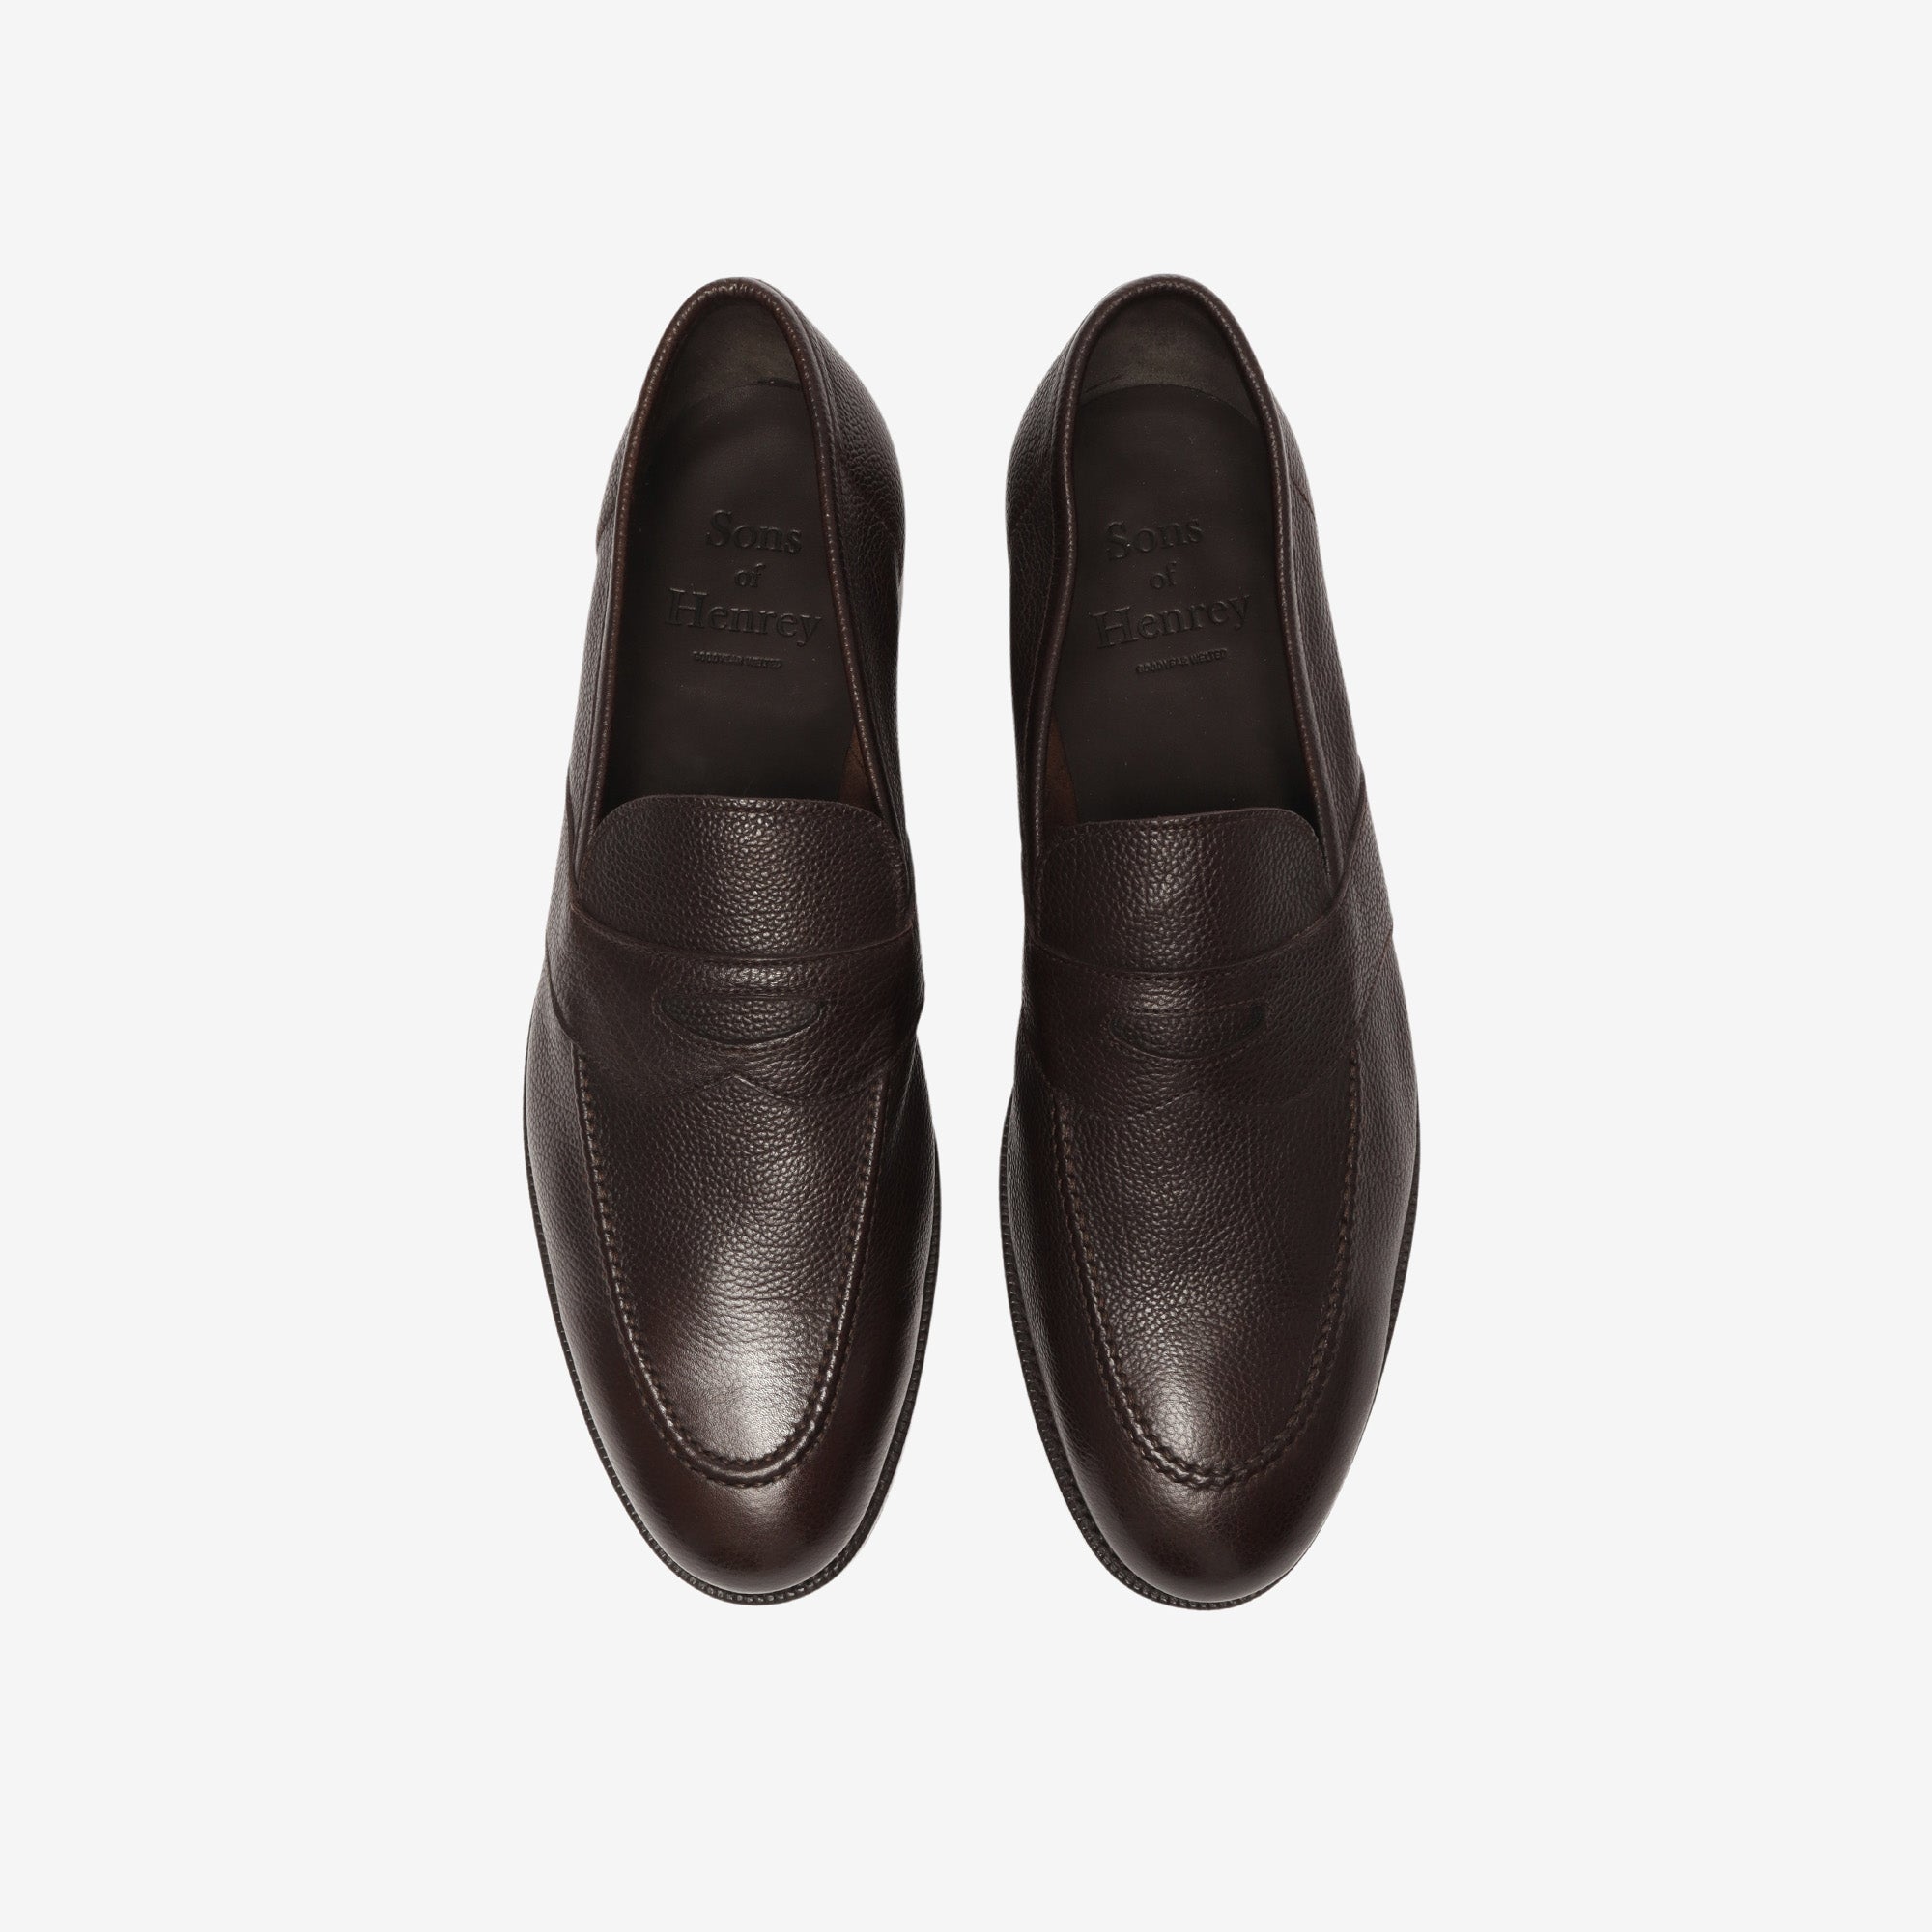 Rusticalf Loafers